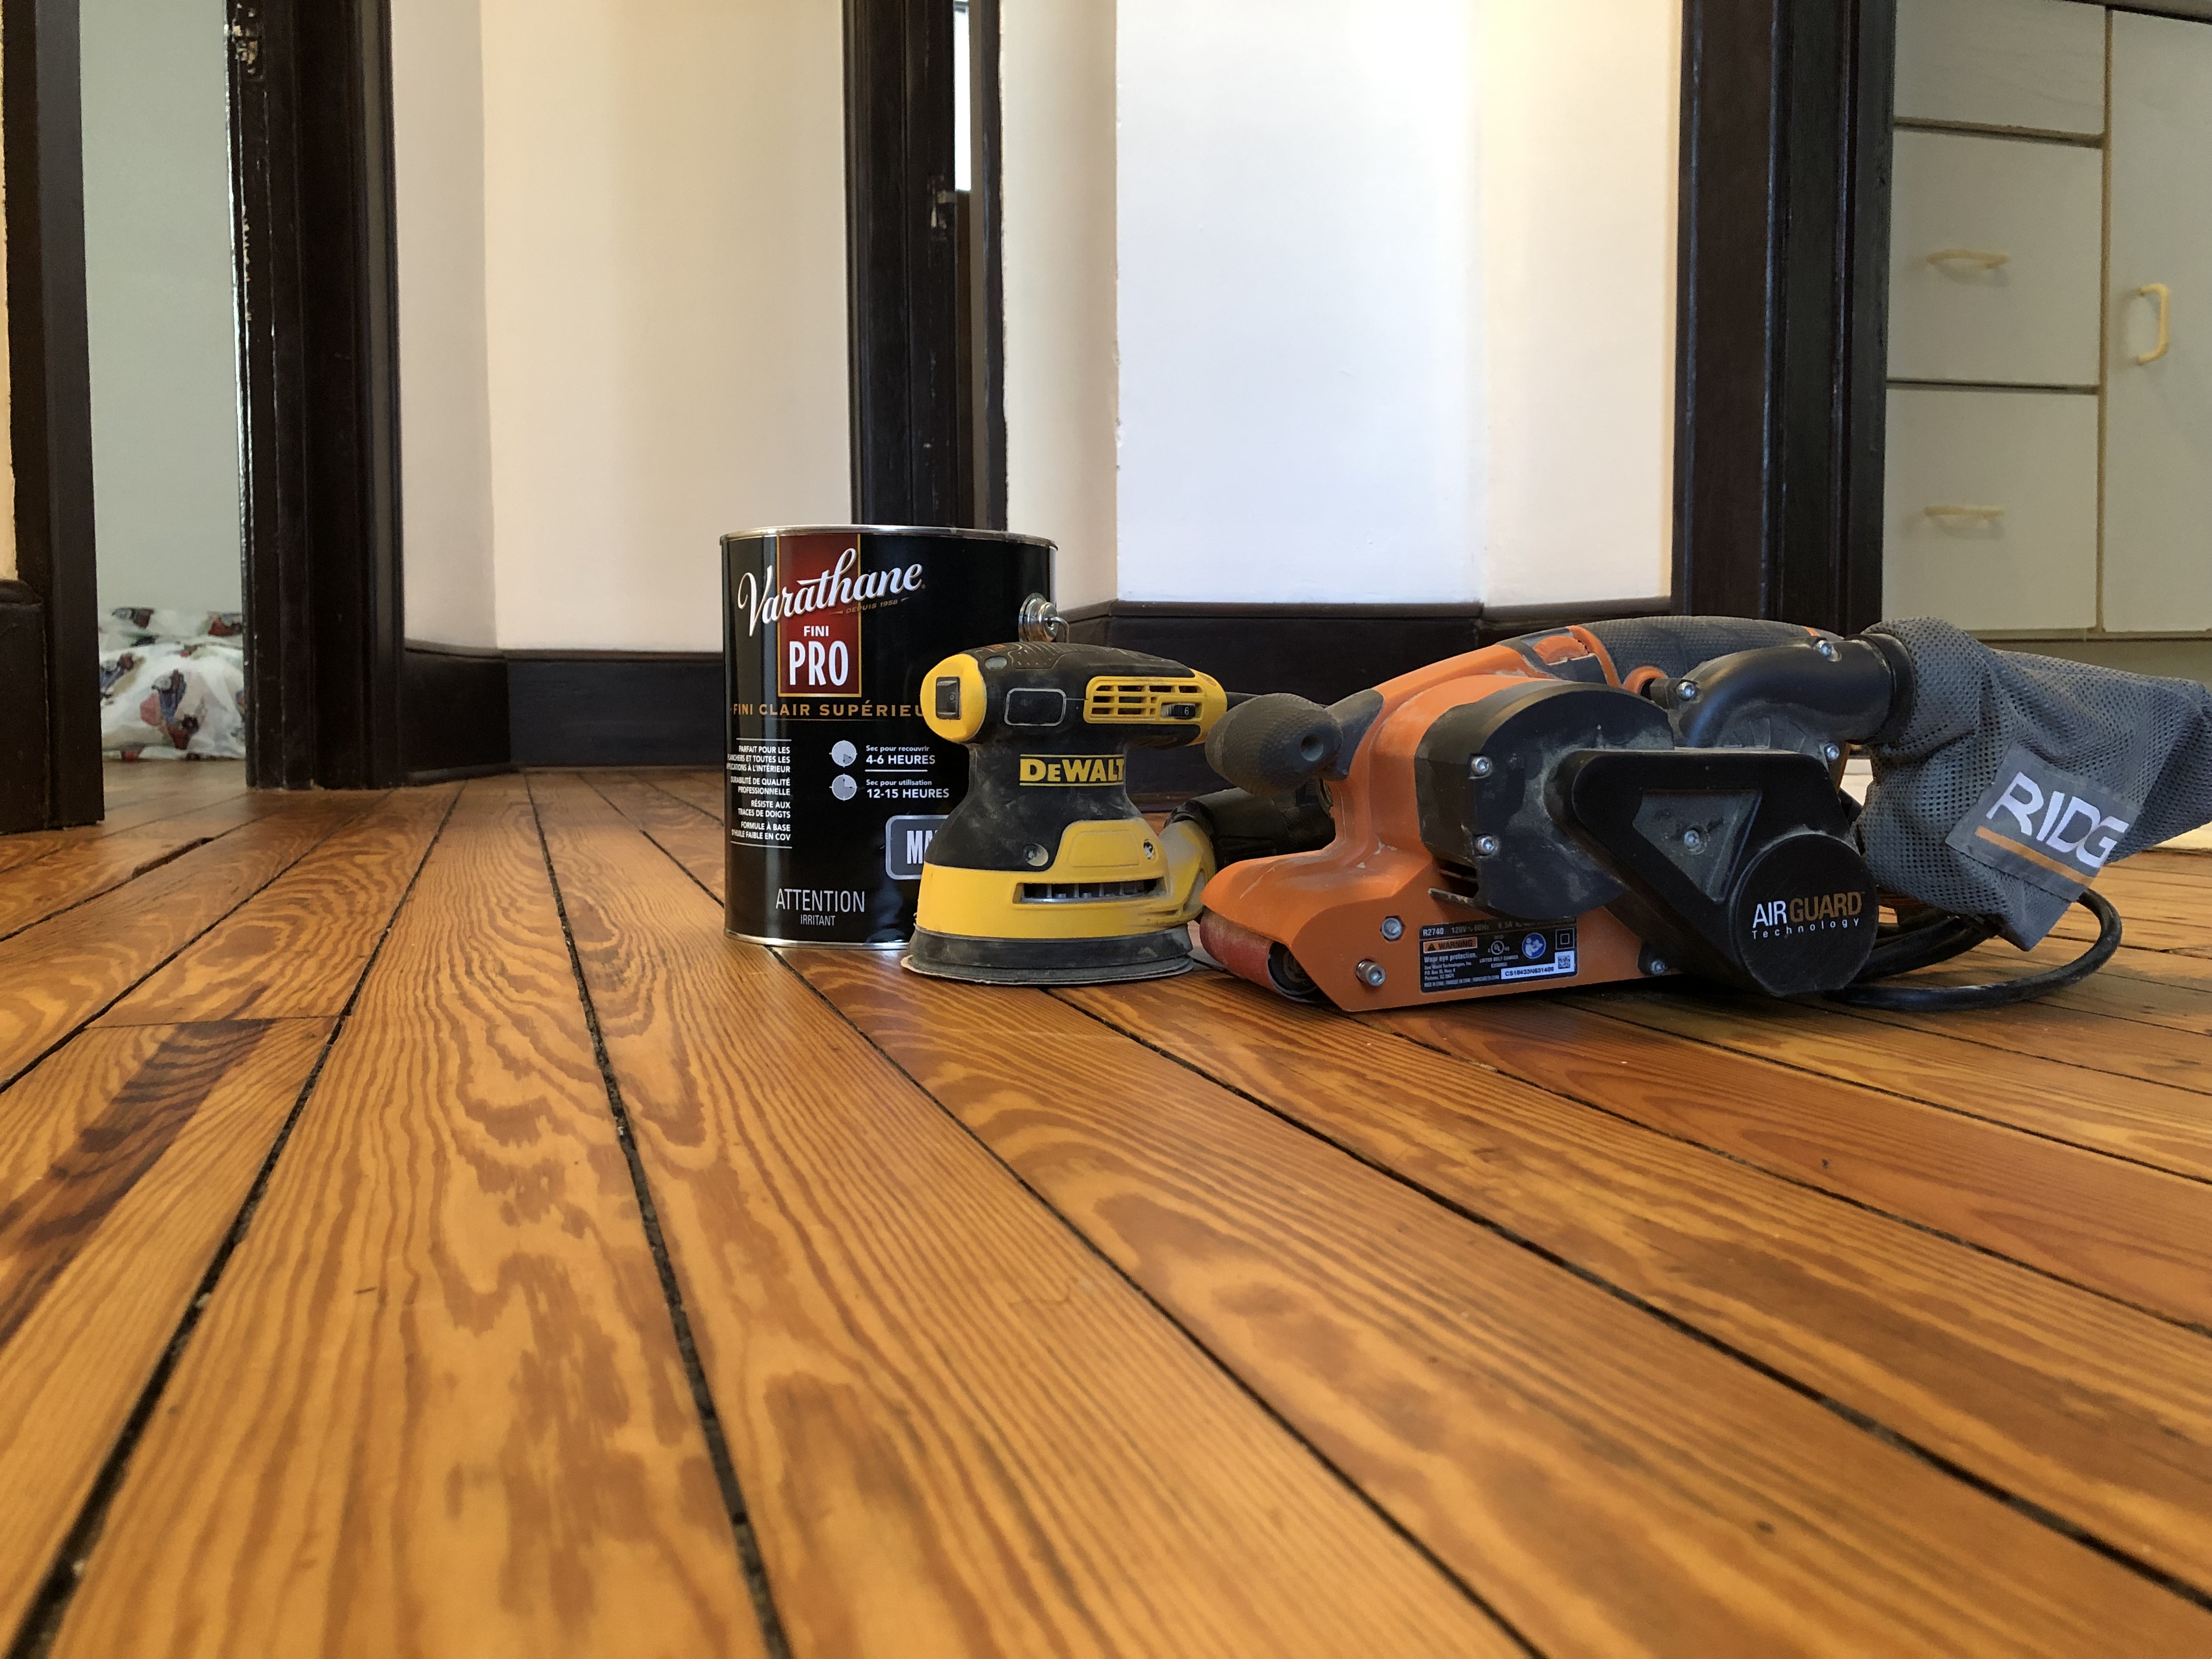 How To Refinish Hardwood Floors Step, How To Sand And Refinish Hardwood Floors